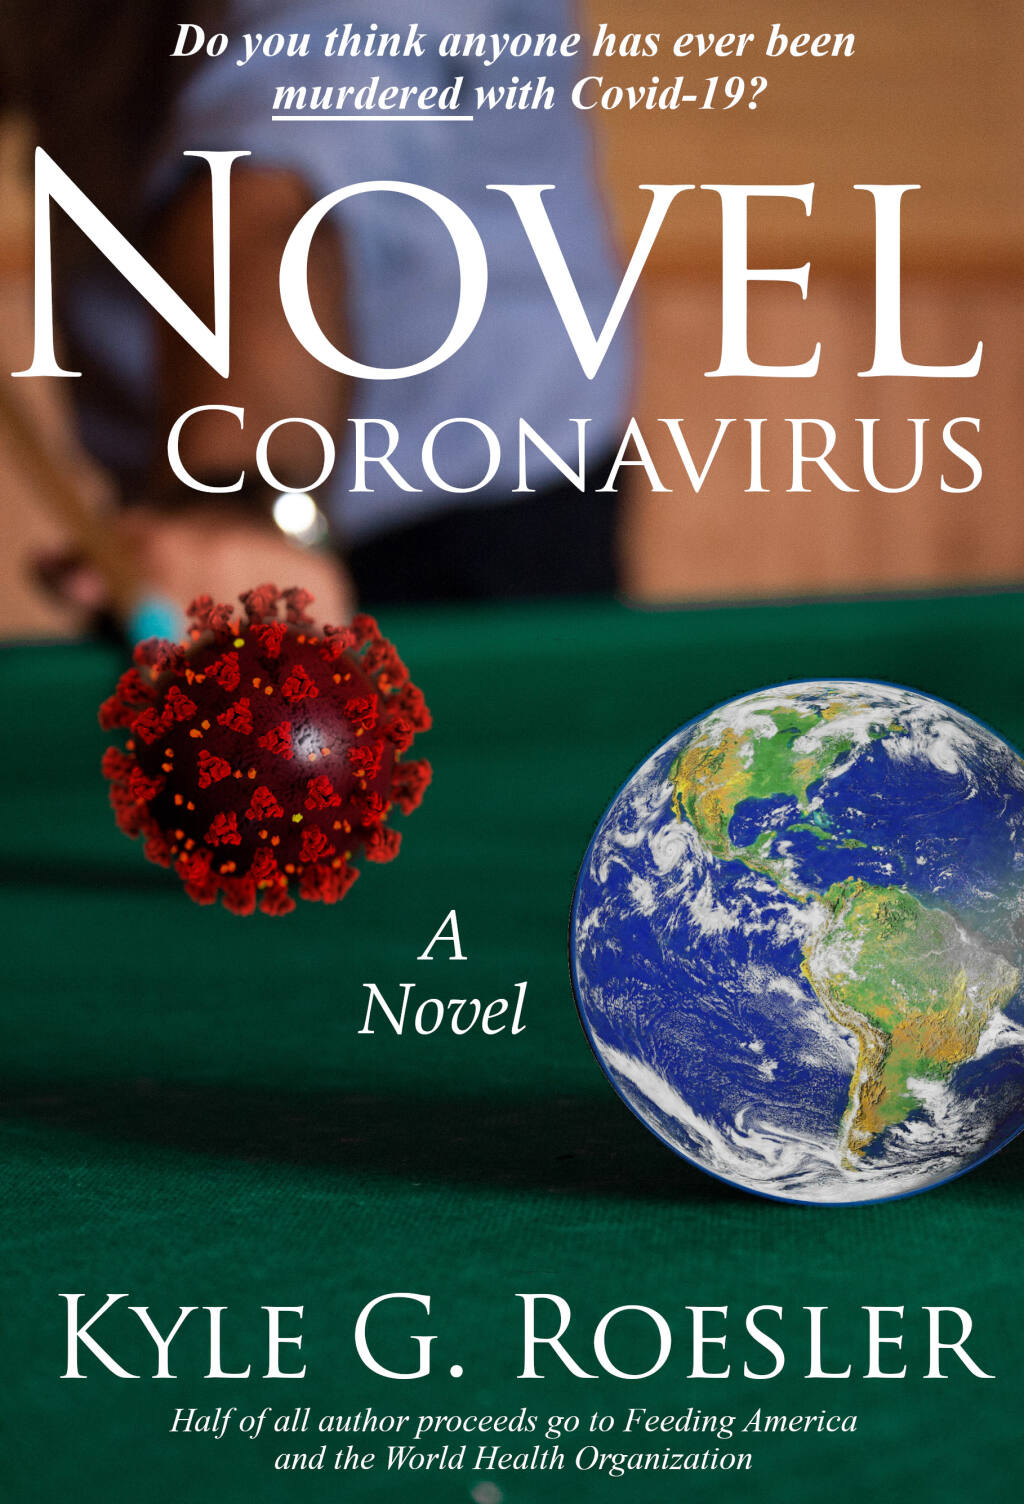 Cover of the paperback book version of 'Novel Coronavirus,' by Kyle G. Roesler (2020).